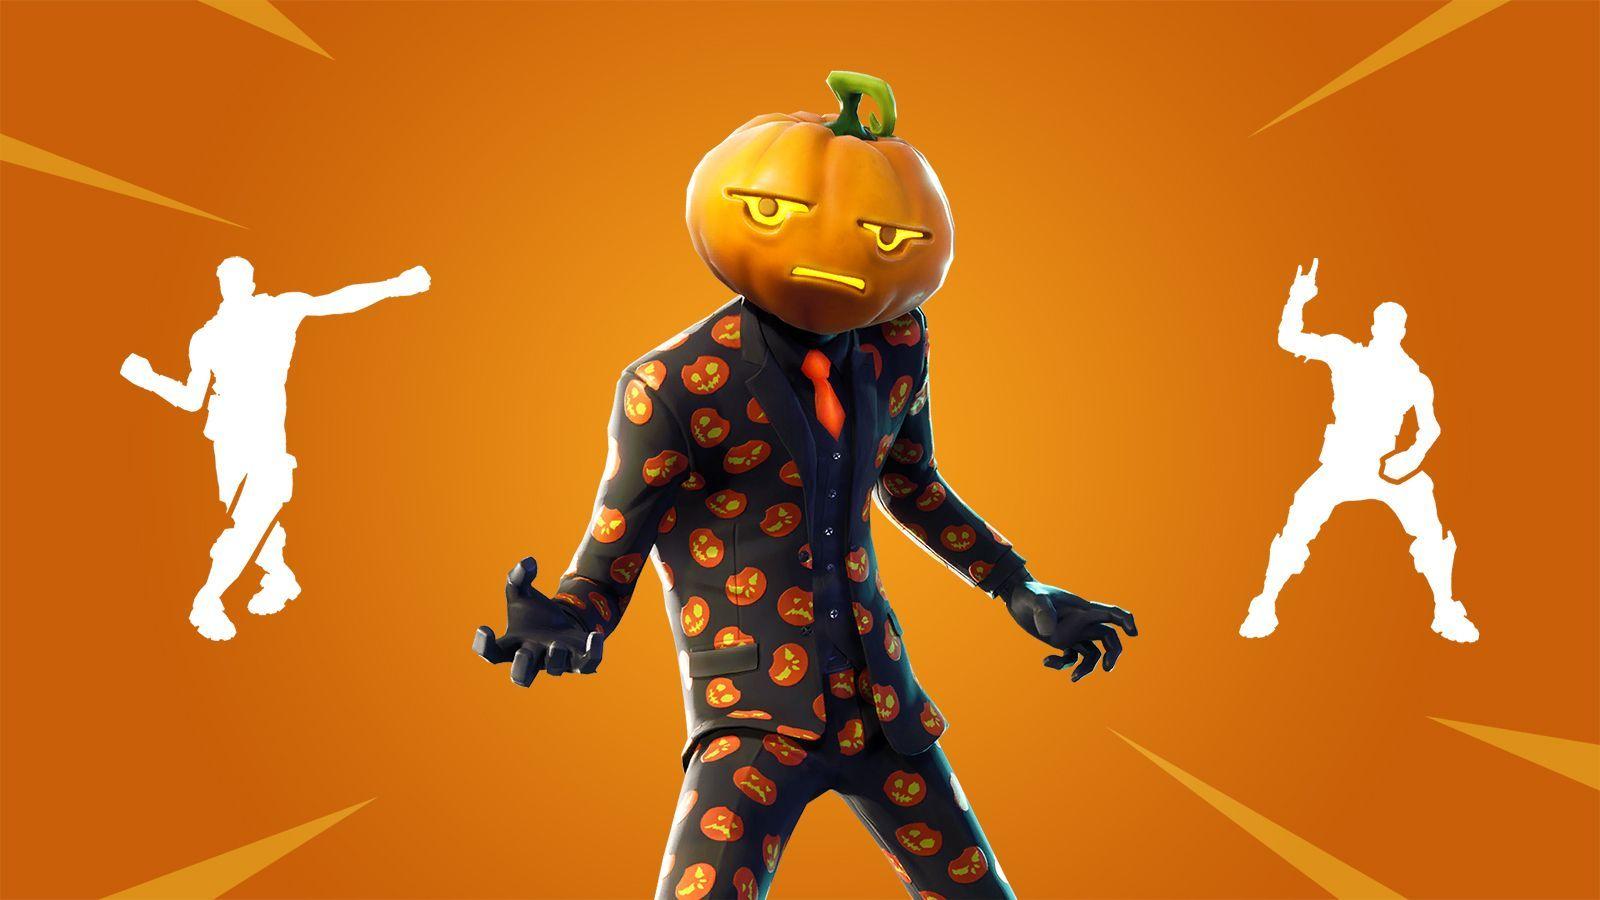 In Game Look At The Upcoming Outfits And Emotes Found In Patch V6.02